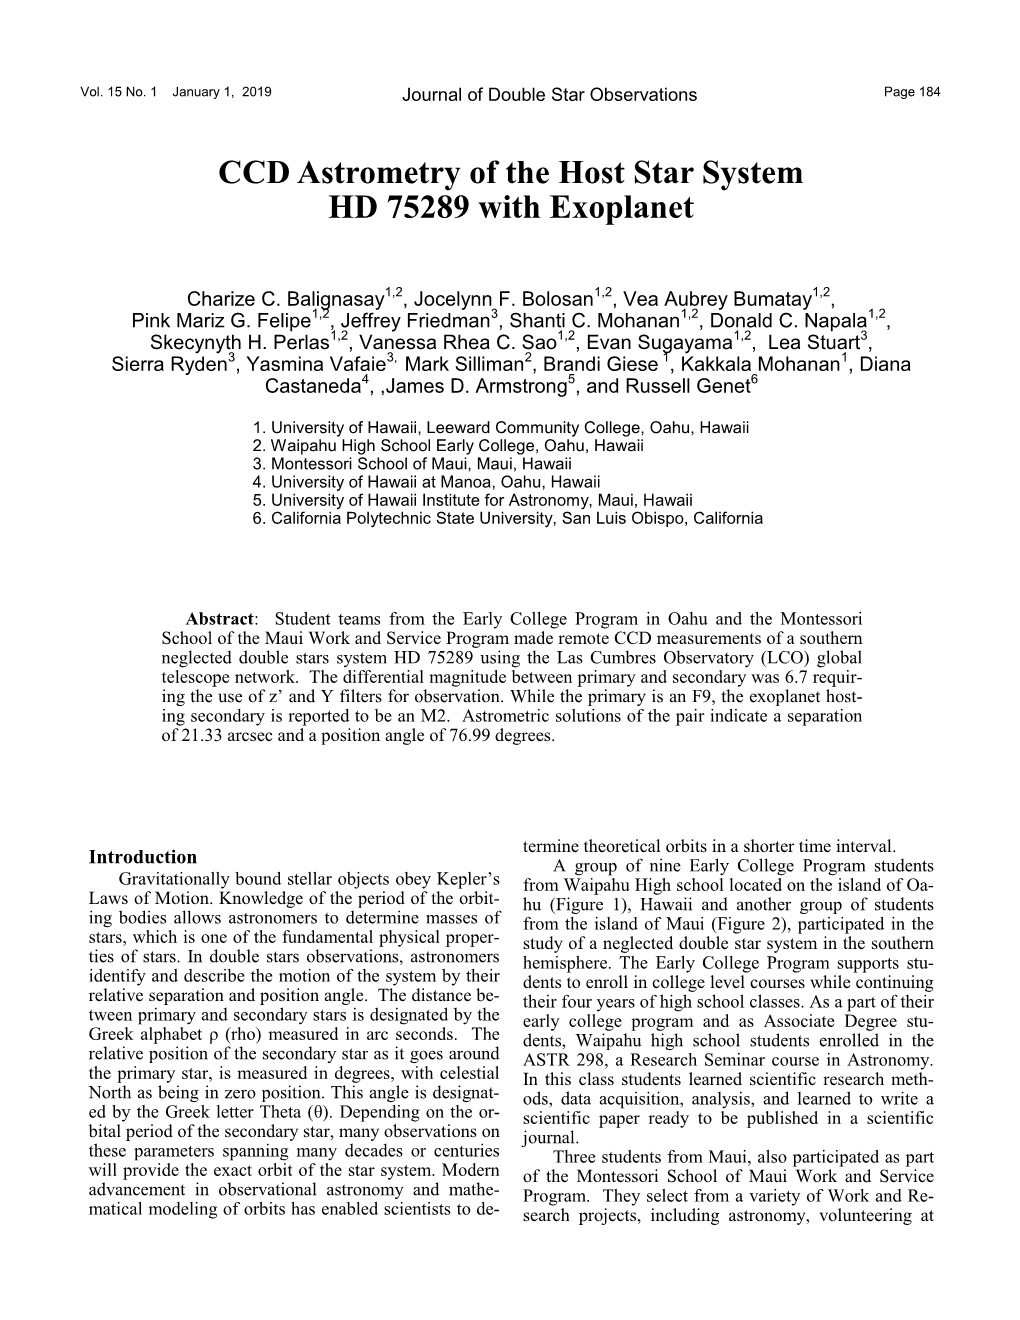 CCD Astrometry of the Host Star System HD 75289 with Exoplanet